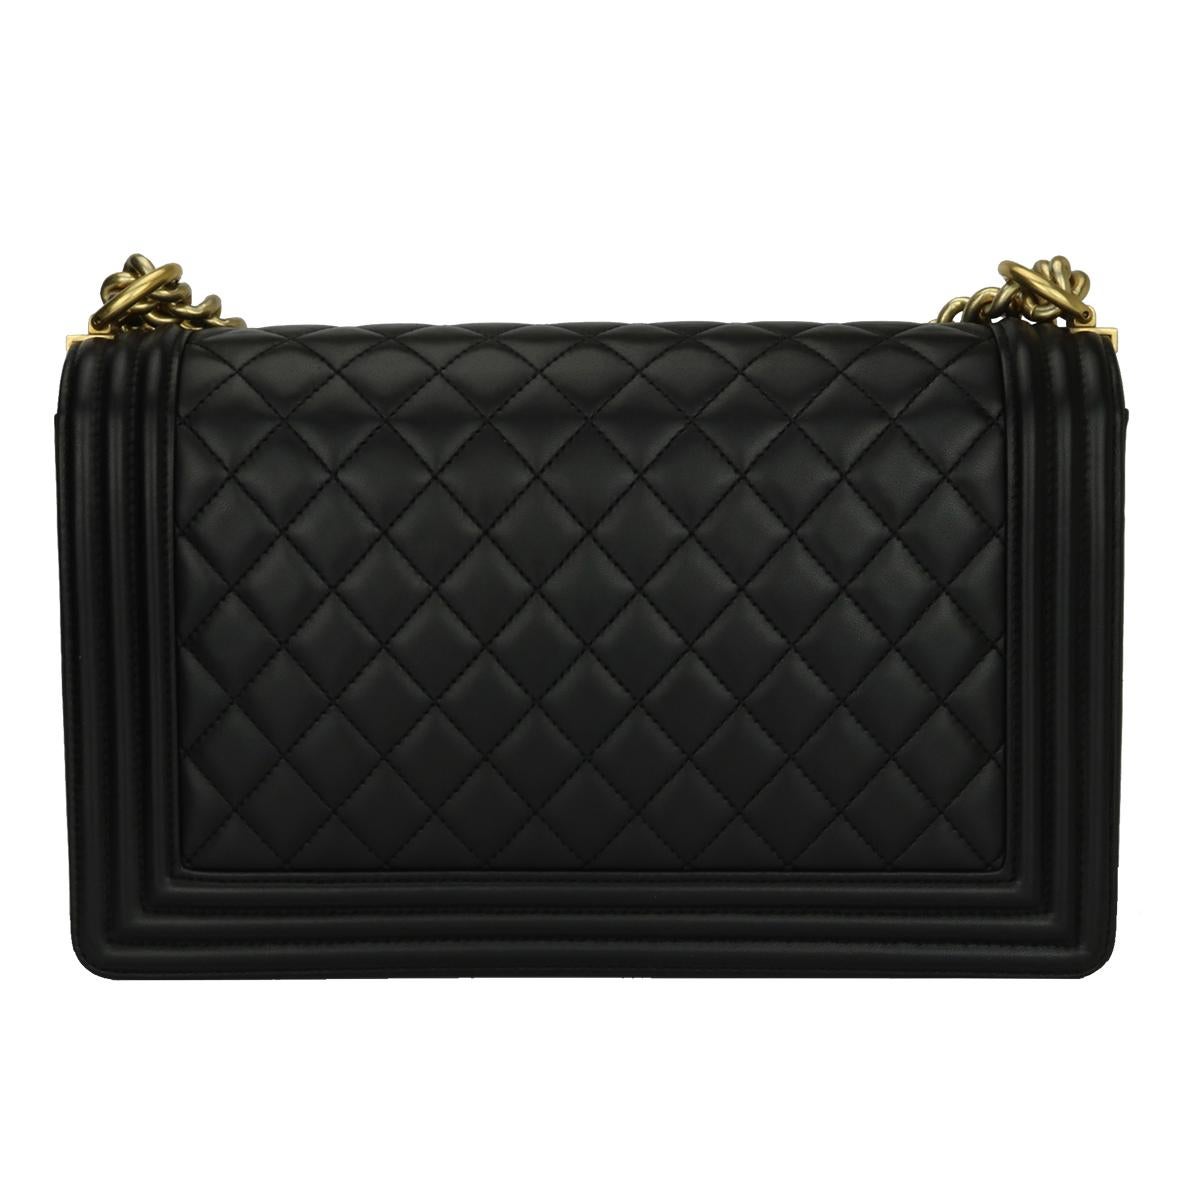 Women's or Men's CHANEL New Medium Quilted Boy Bag Black Lambskin with Brushed Gold Hardware 2015